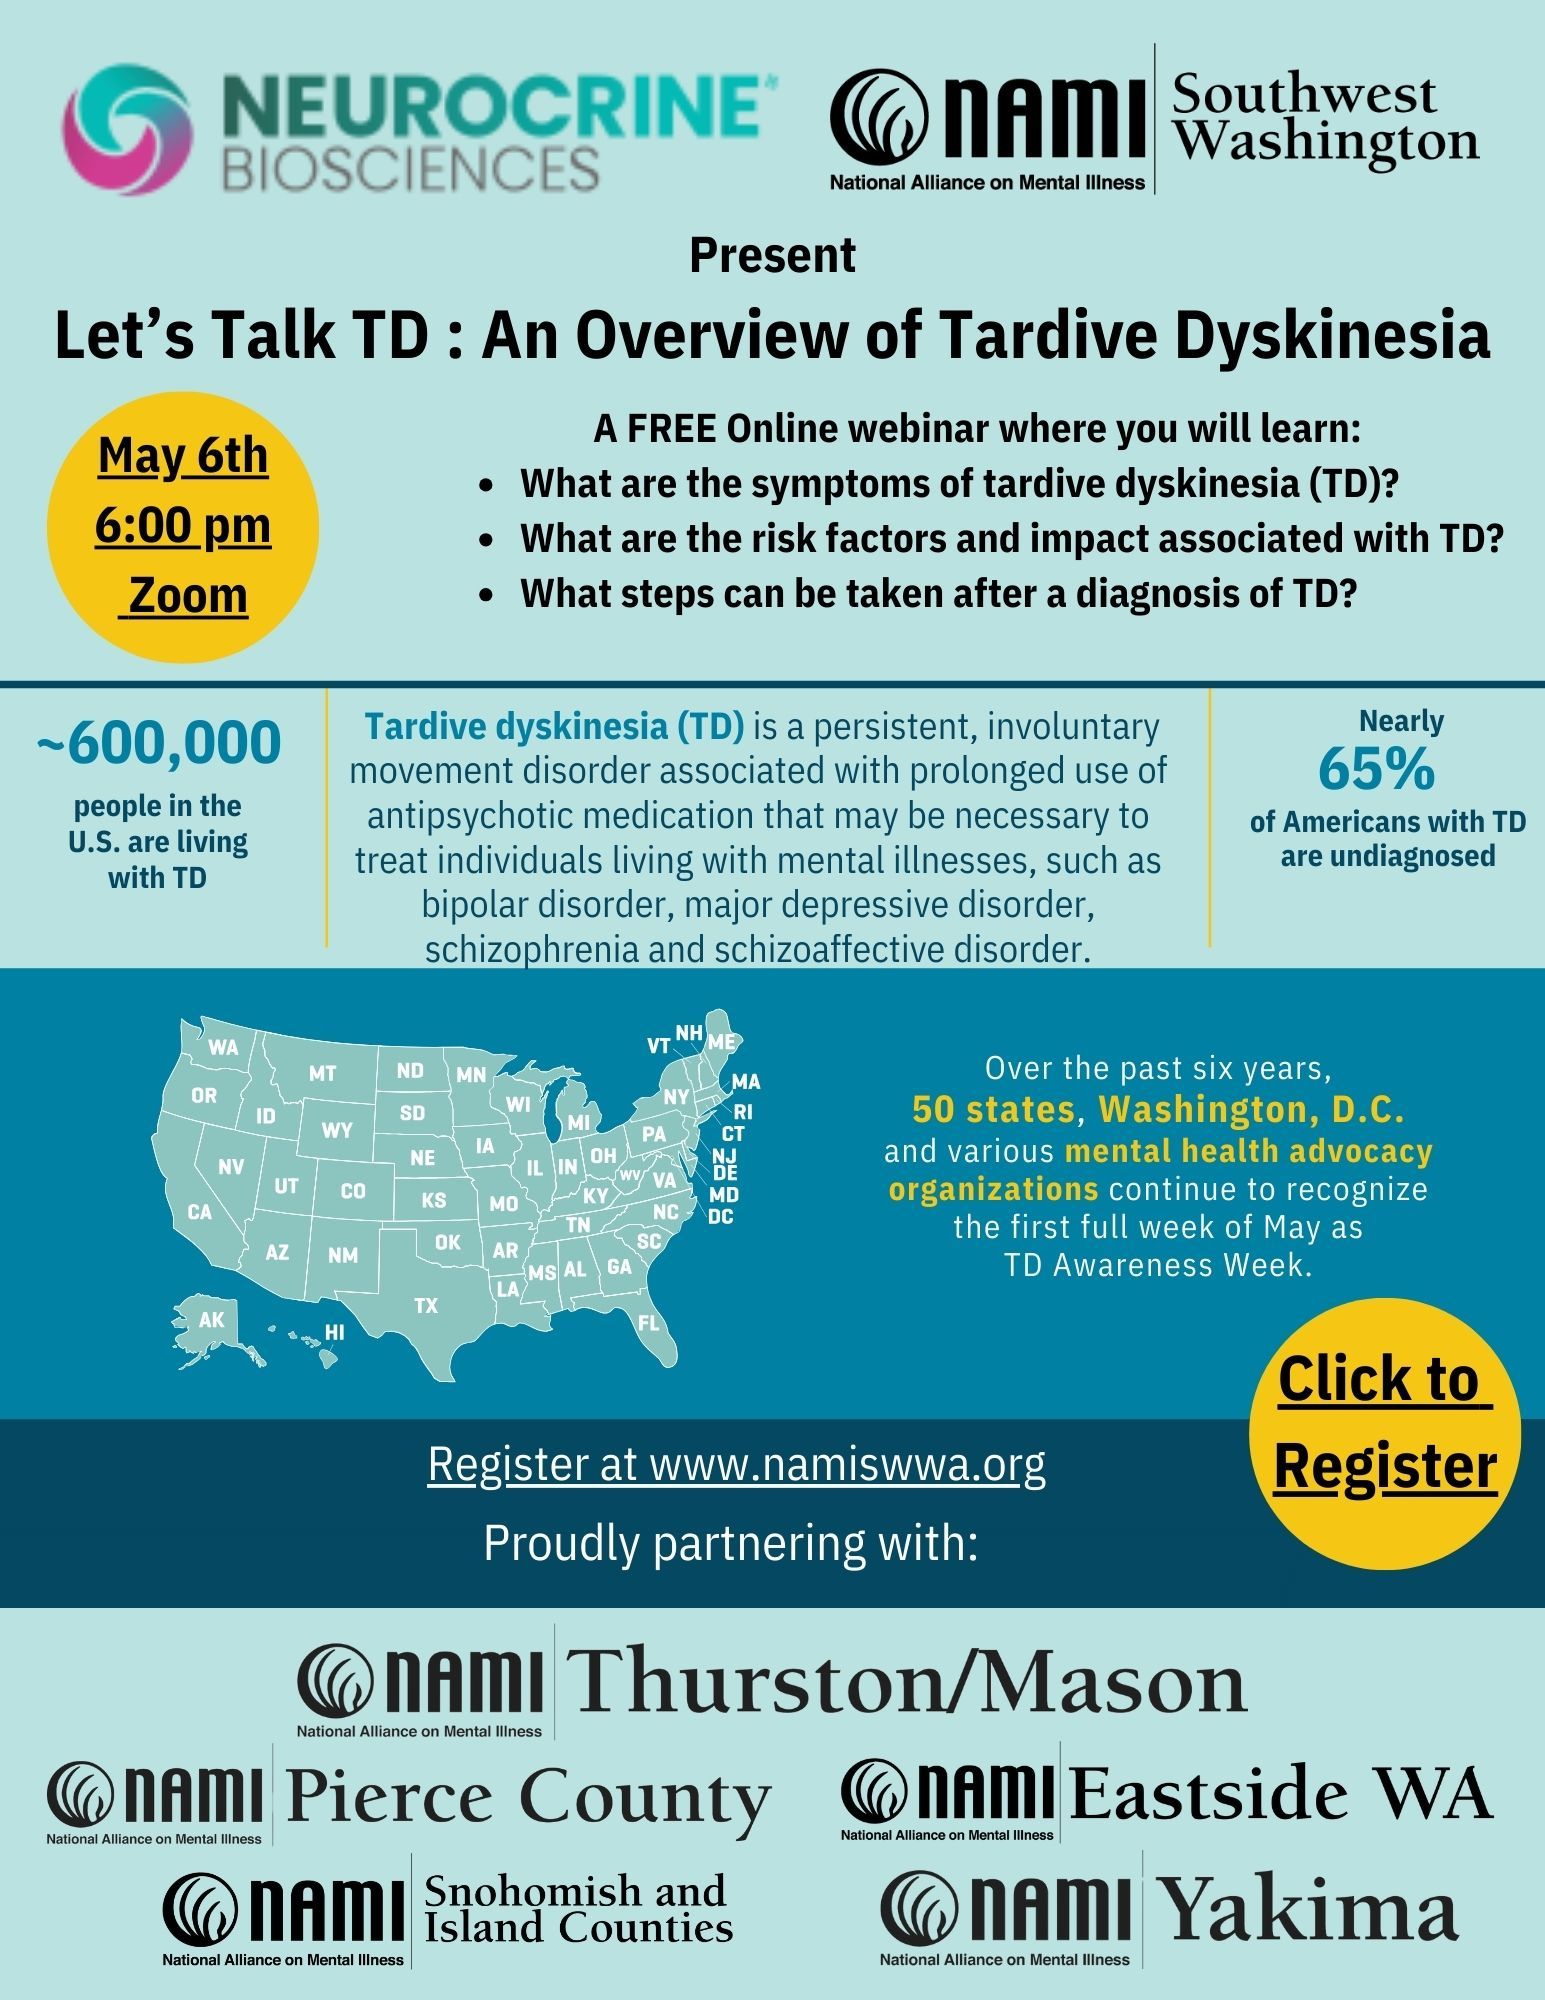 An overview of Tardive Dyskinesia